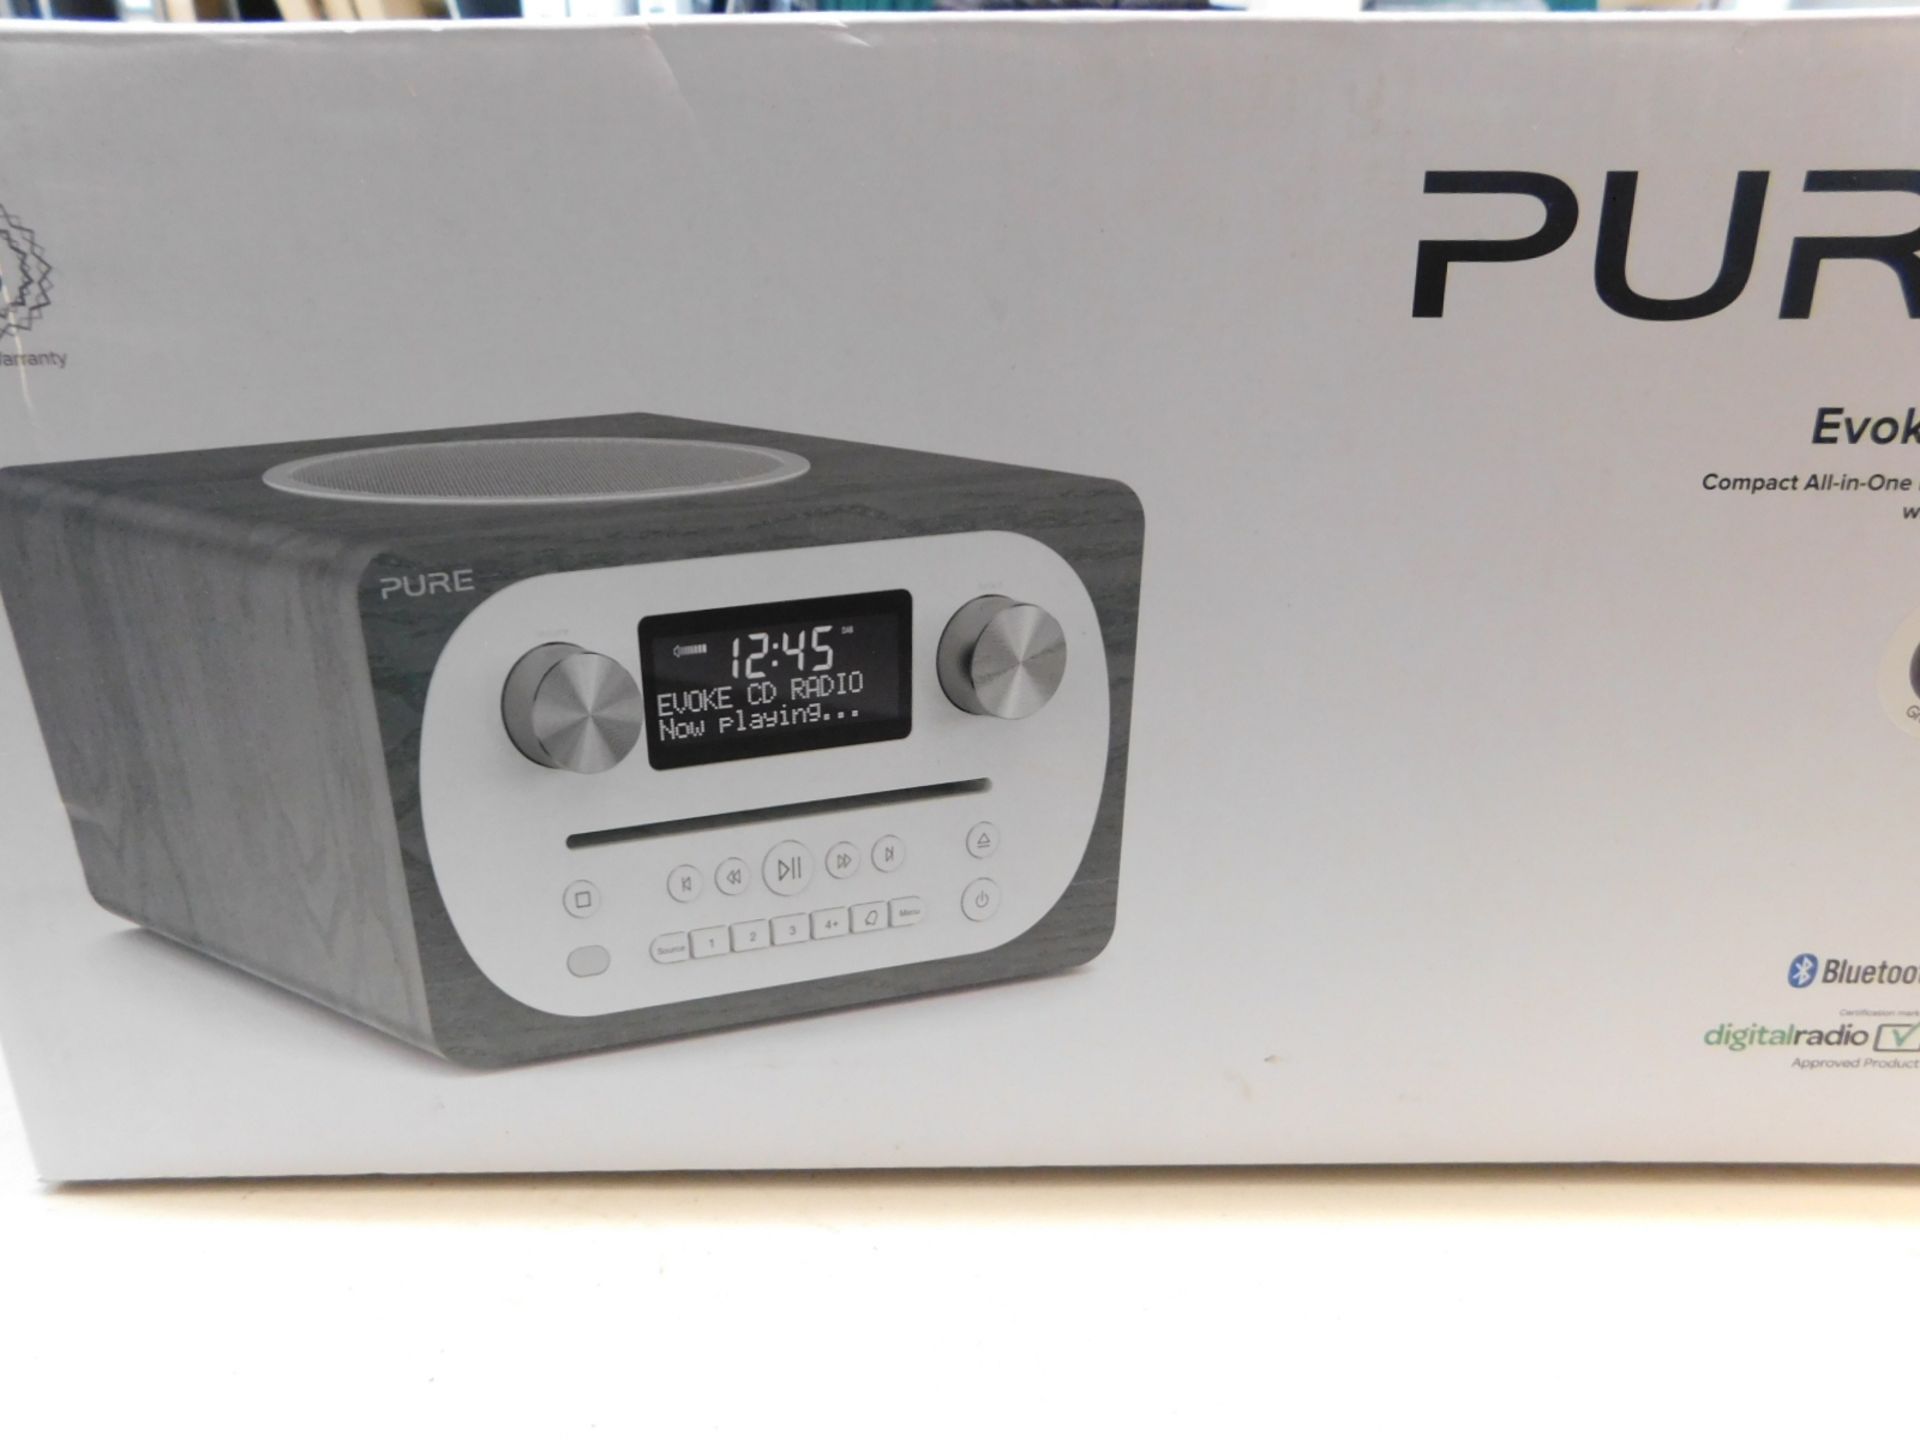 1 BOXED PURE EVOKE C-D4 STEREO ALL IN ONE MUSIC SYSTEM WITH BLUETOOTH RRP Â£199.99